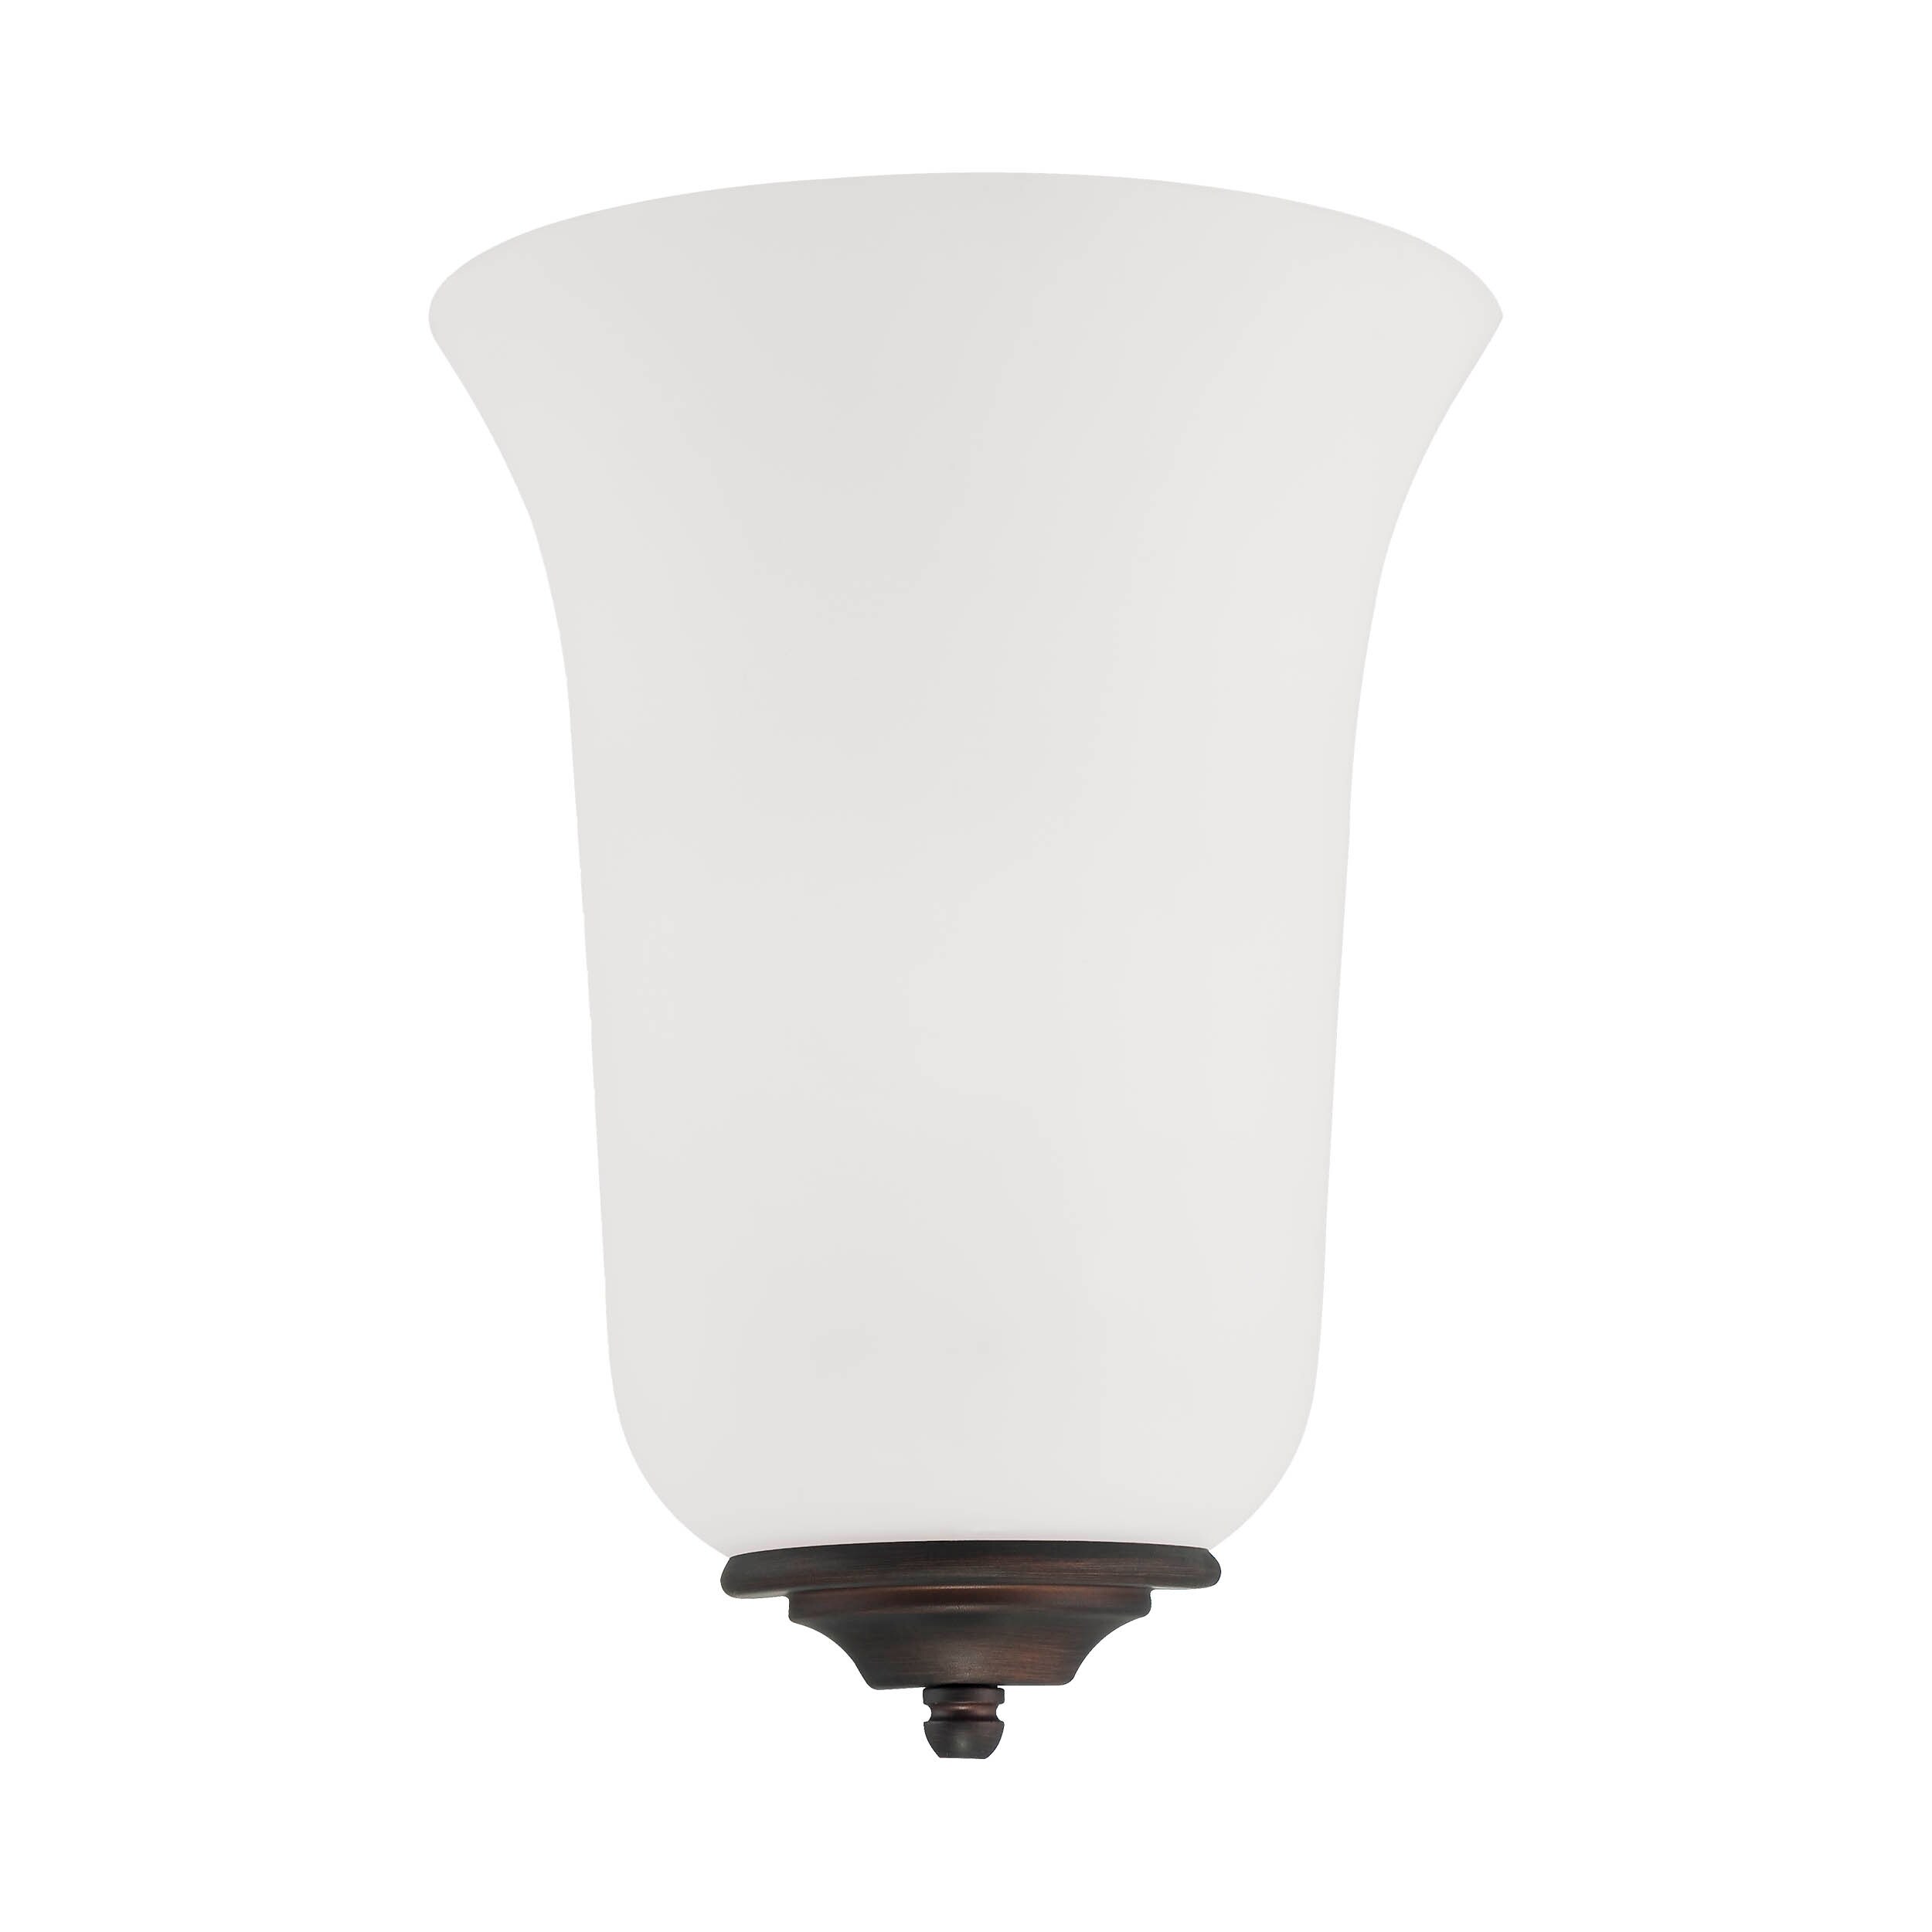 Millennium Lighting Rubbed Bronze/Rubbed Silver 1 Light Wall Sconce - image 1 of 2